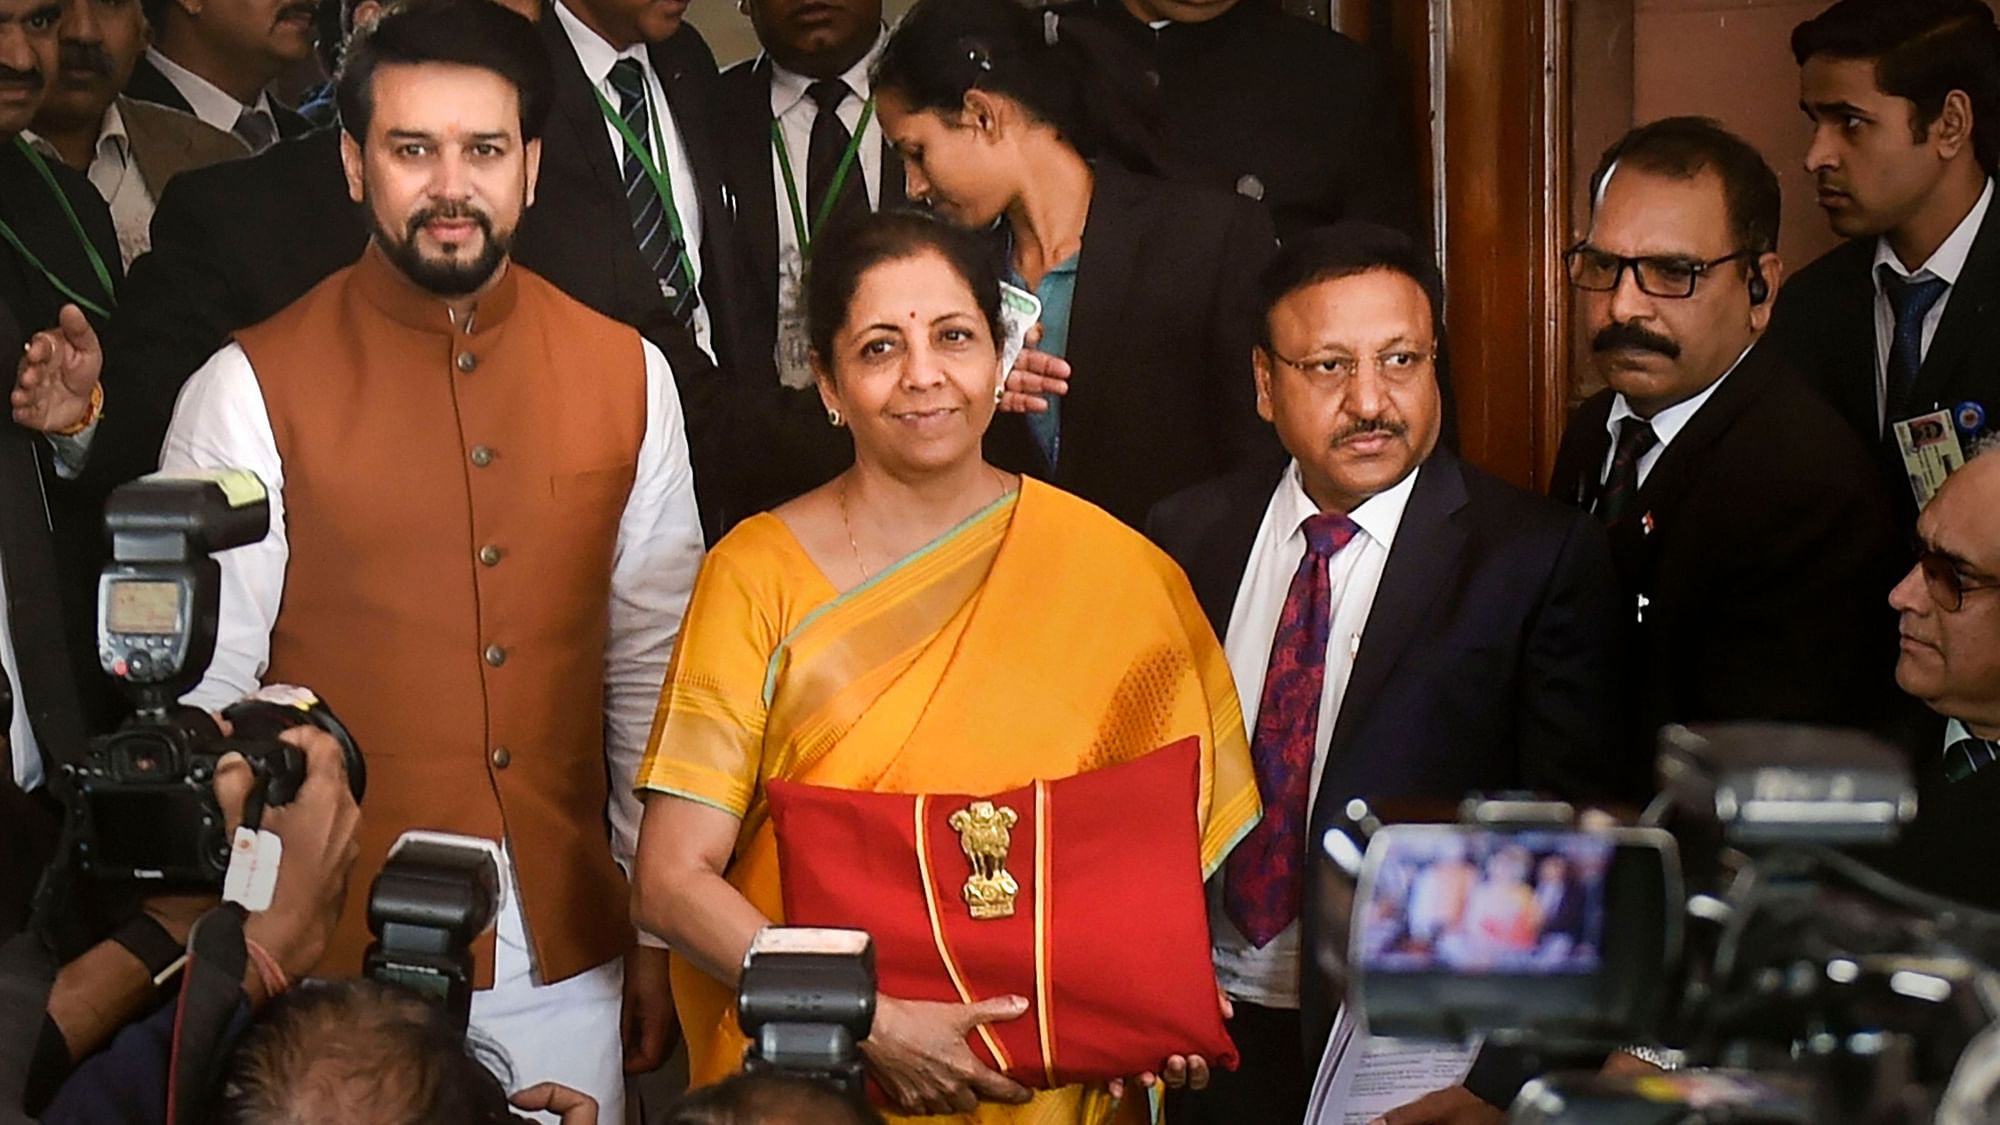 Budget 2020 Key Points and Highlights: Several important decisions were announced in the 2020 Union Budget. Here’s a quick rundown of all the important points. You can read more about each highlight below: